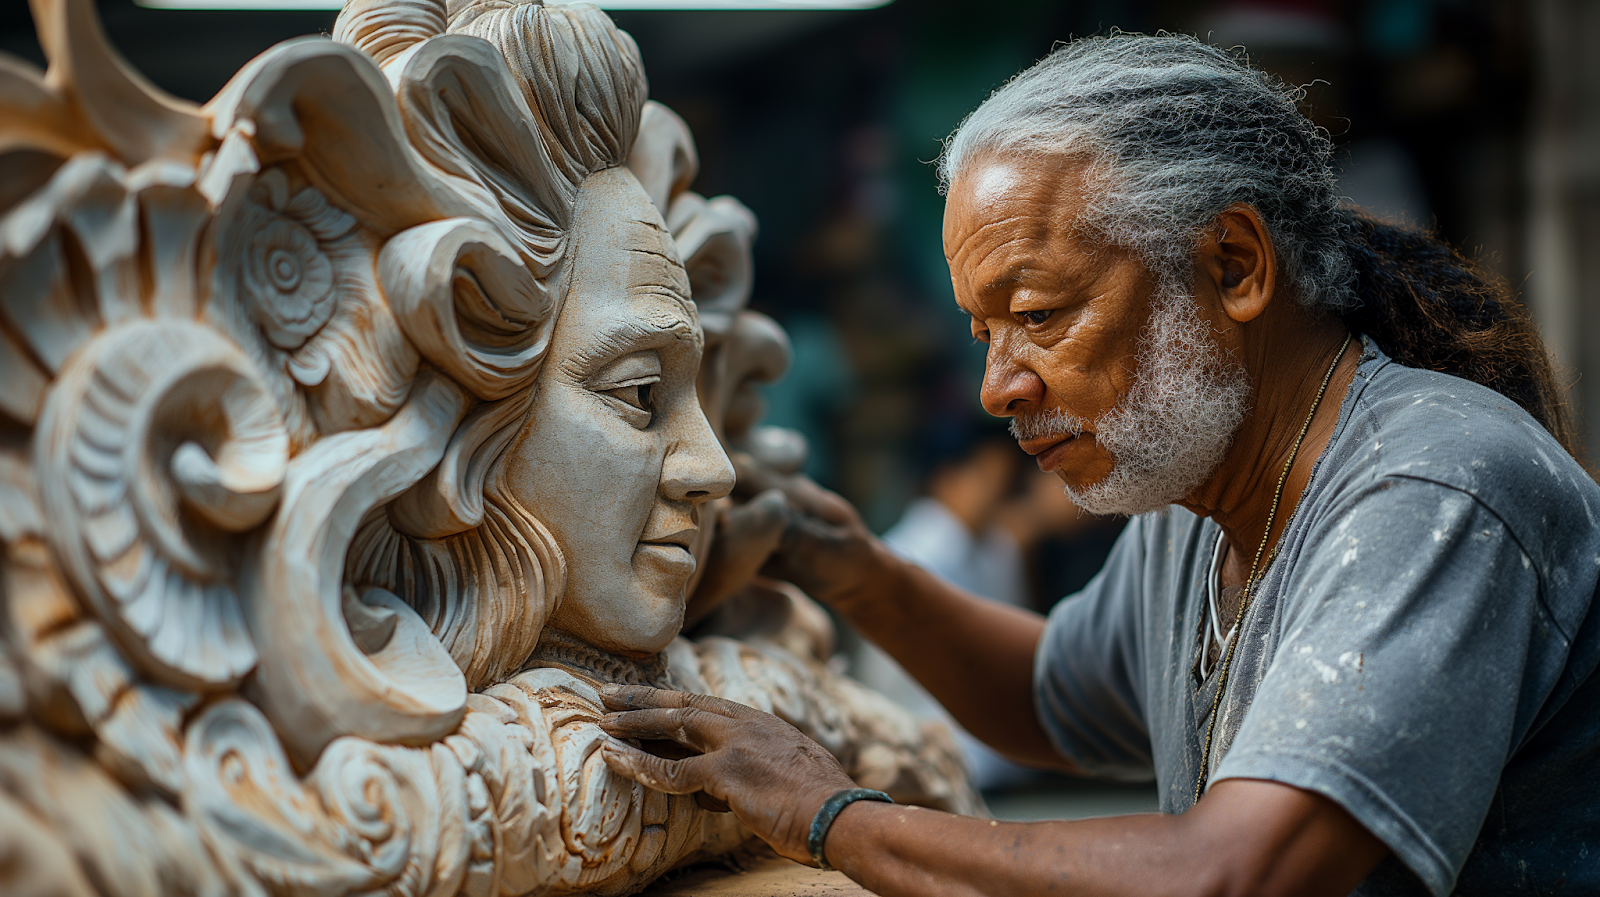 Artisan in a Rio workshop meticulously crafting traditional masks and costumes for the Carnival, showcasing their skill and creativity.